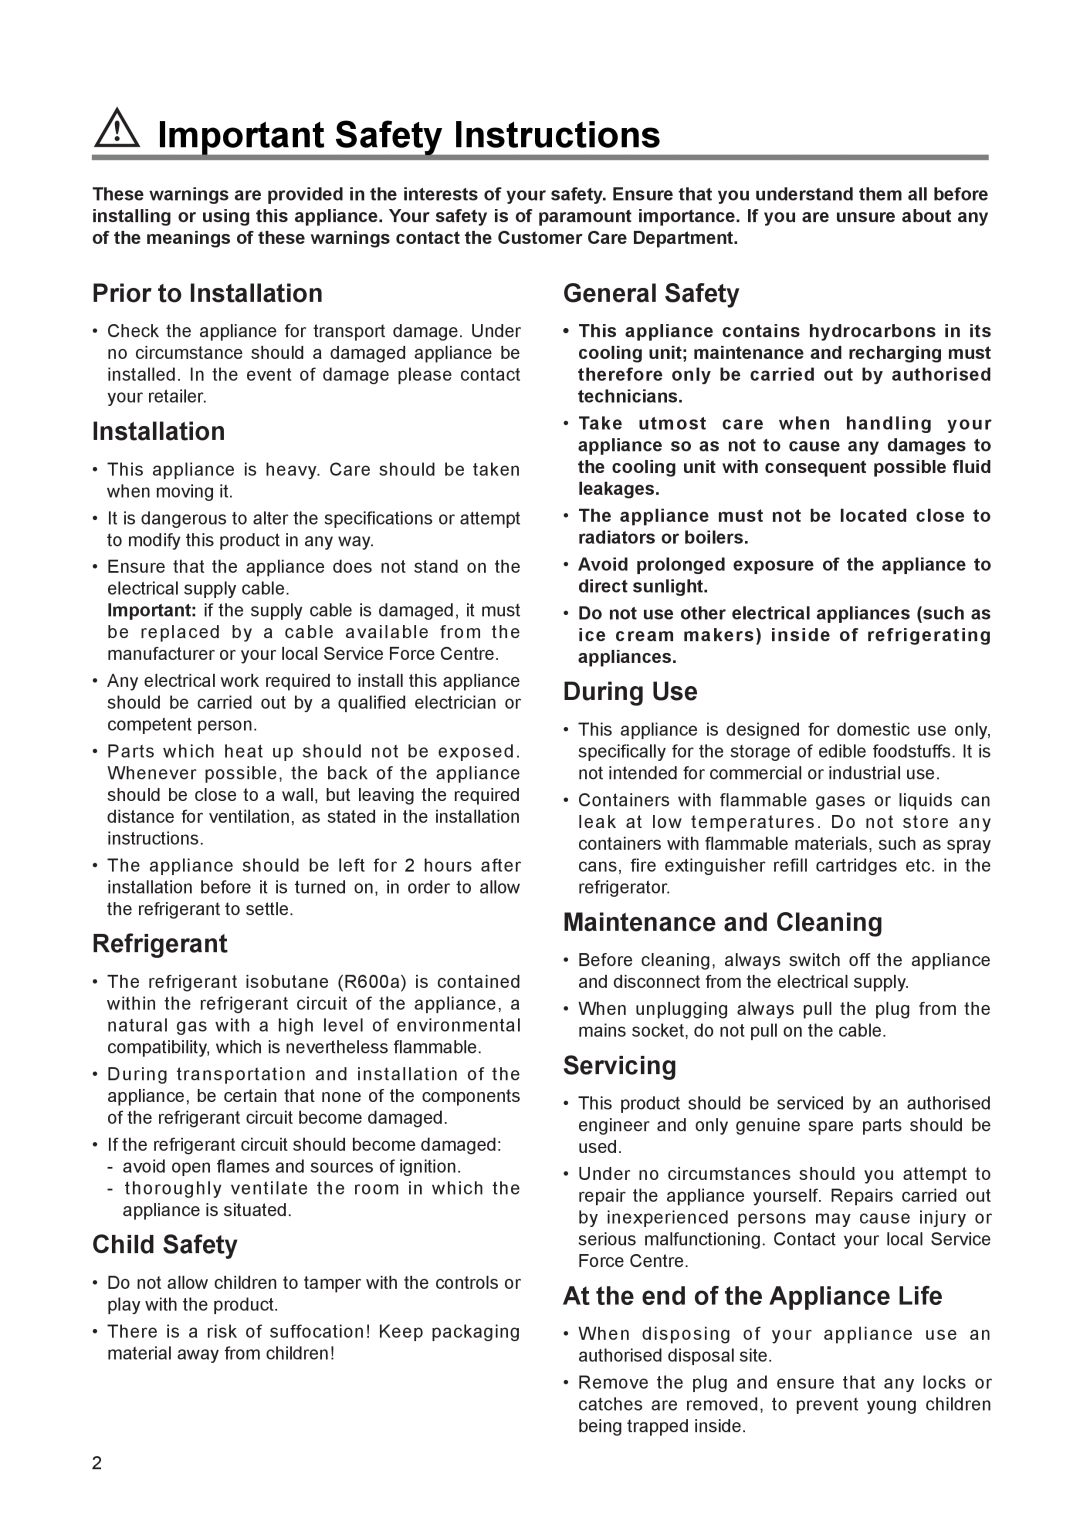 Zanussi ZI 9155 Important Safety Instructions, Prior to Installation, Refrigerant, Child Safety, General Safety, Servicing 